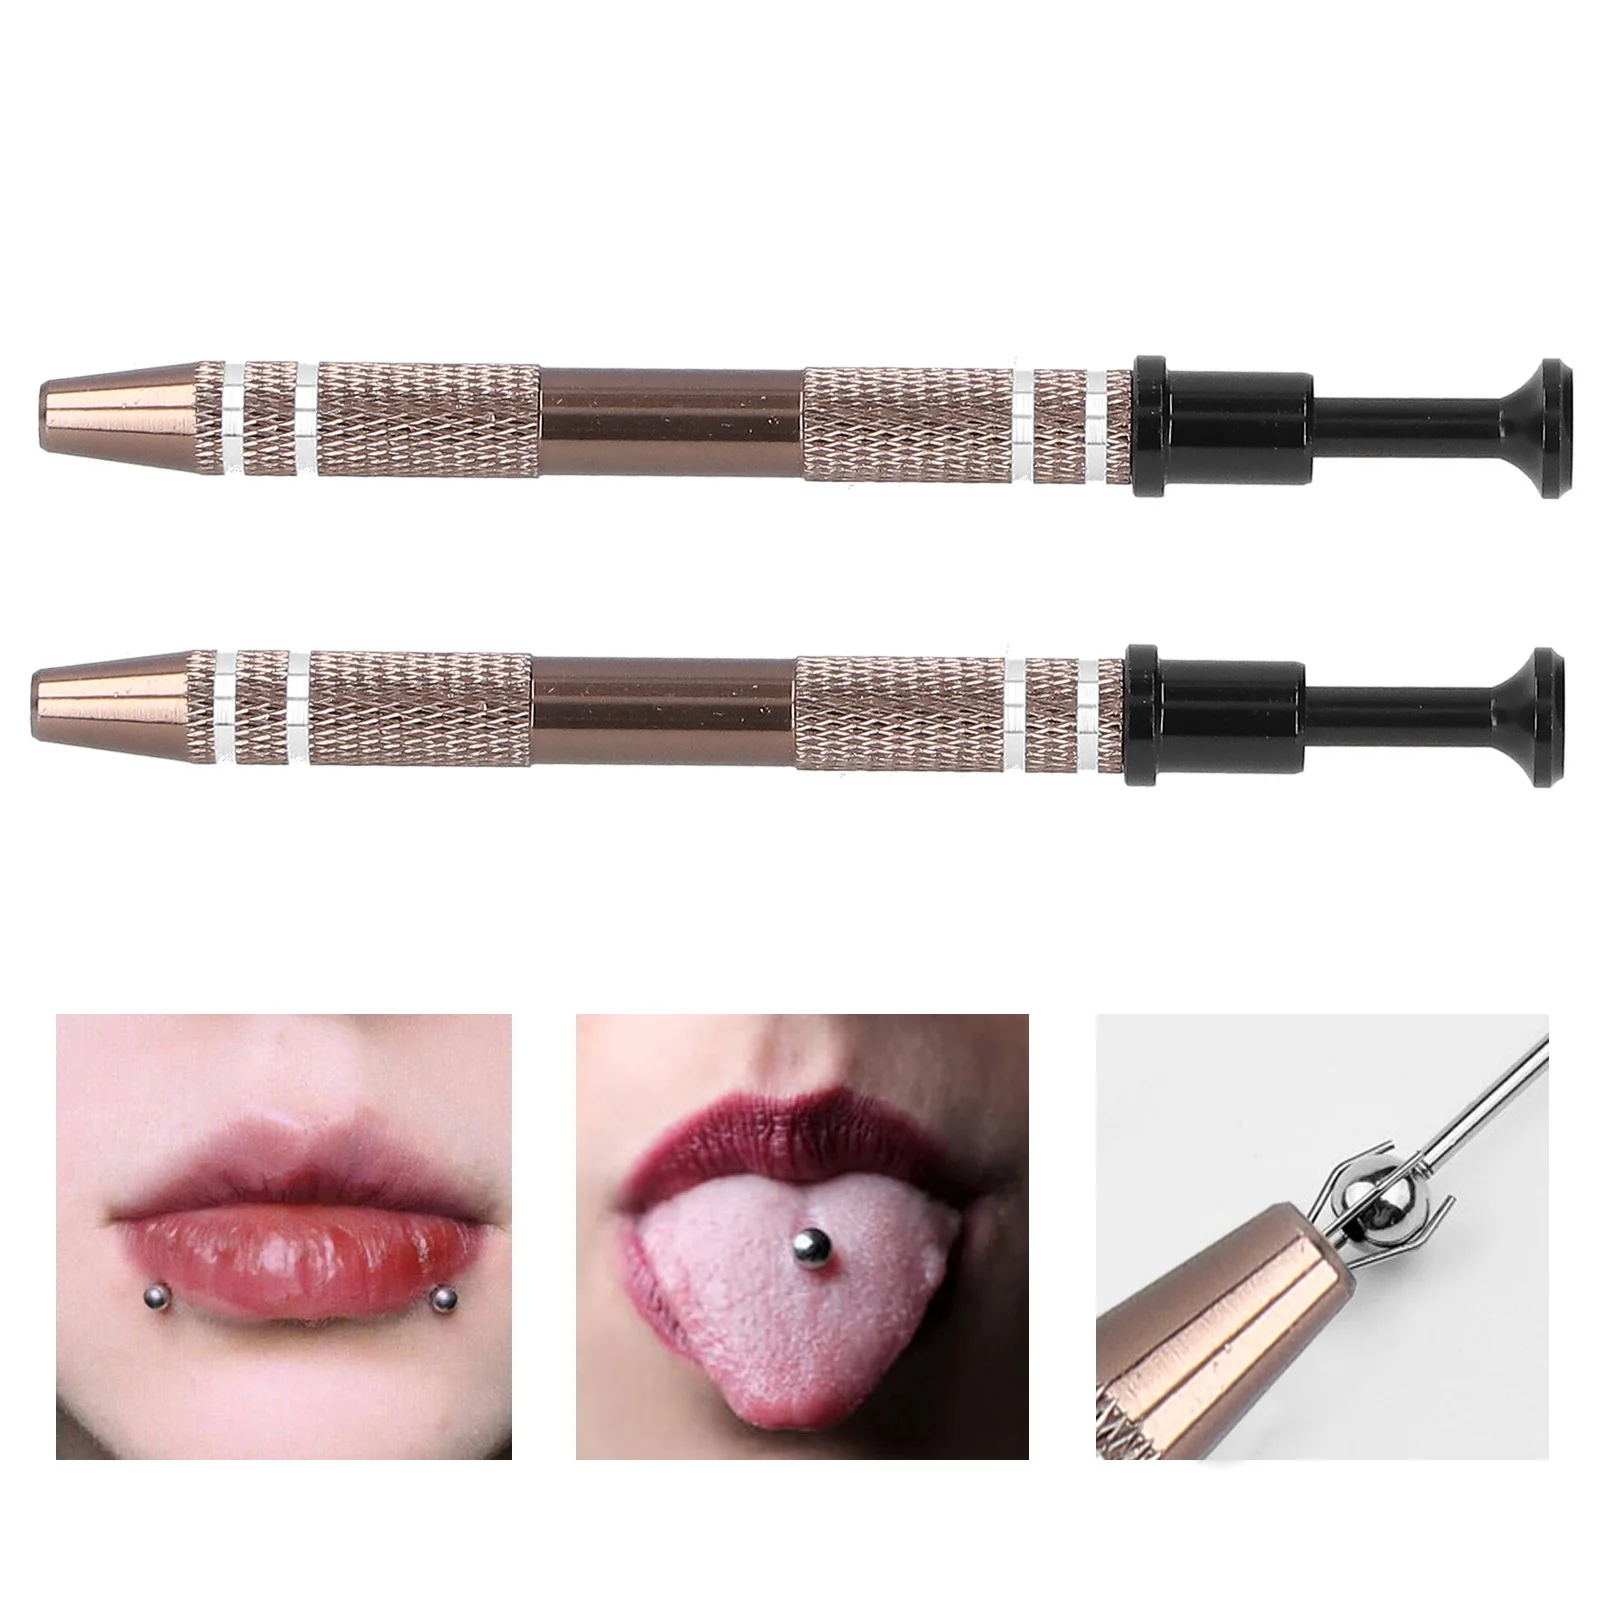 2Pcs Microblading Alloy High Precision 4 Prongs Bead Holder Jewelry Bead Grasping Pick Up Tool Body Tattoo Piercing Accessories diy jewelry tweezers diamond gem making tool for jeweler soldering welding tweezer straight curved tip selflock bead holder pick